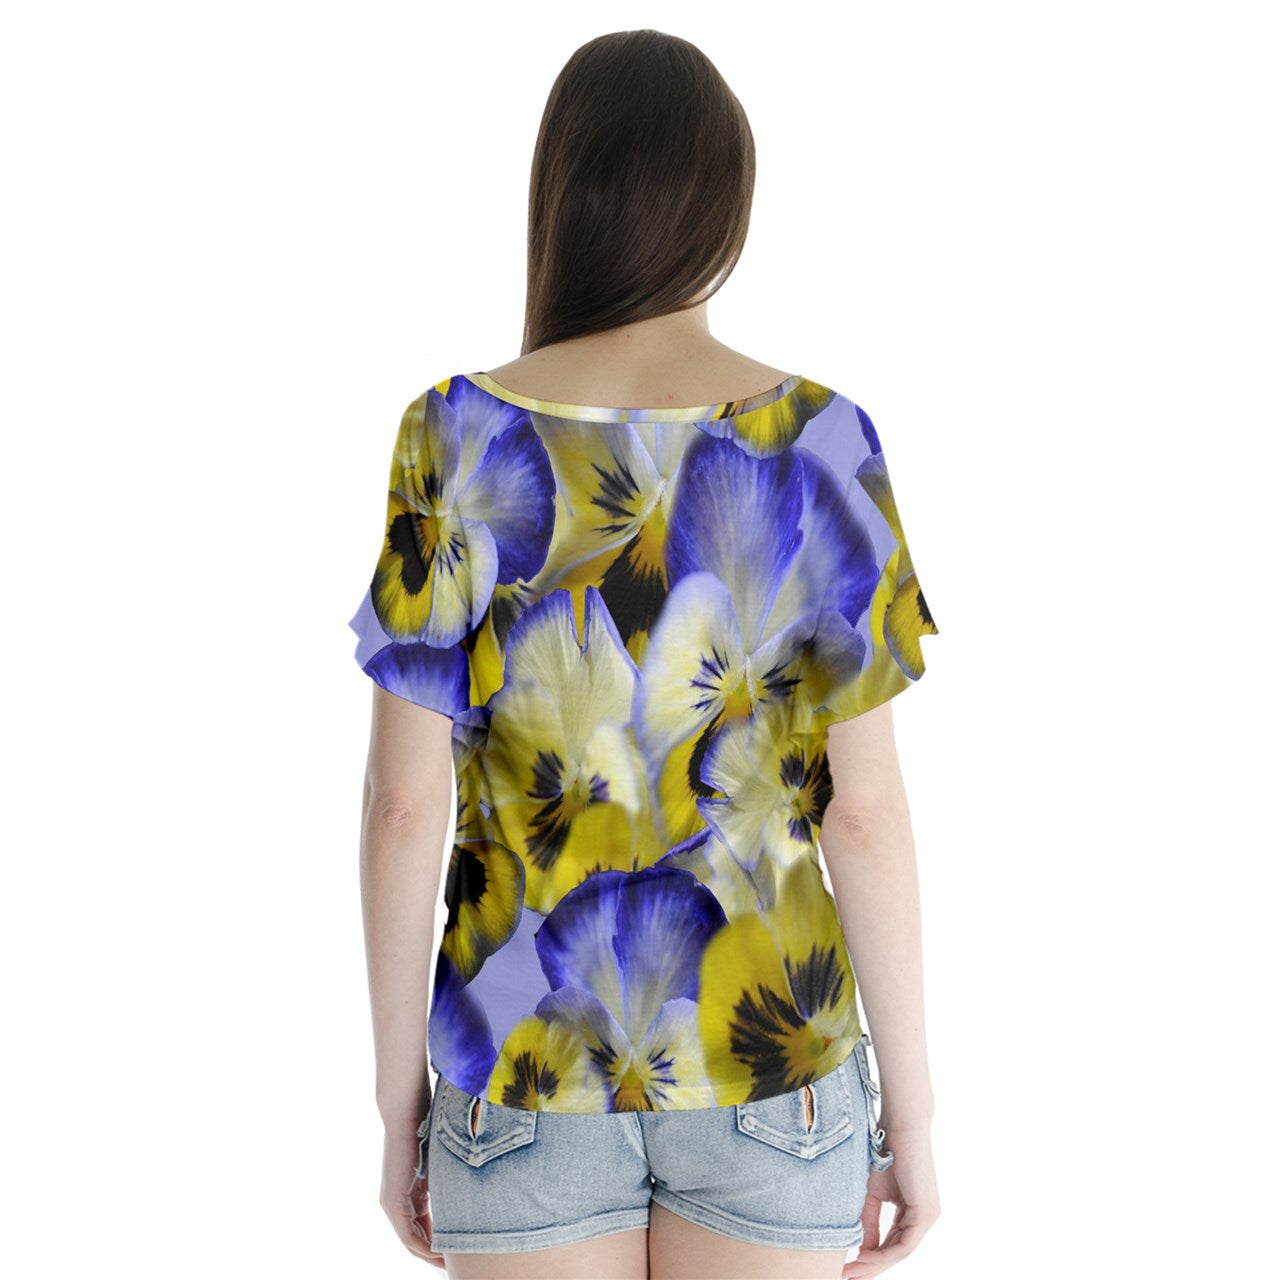 Blue and Yellow Pansies V-Neck Flutter Sleeve Top